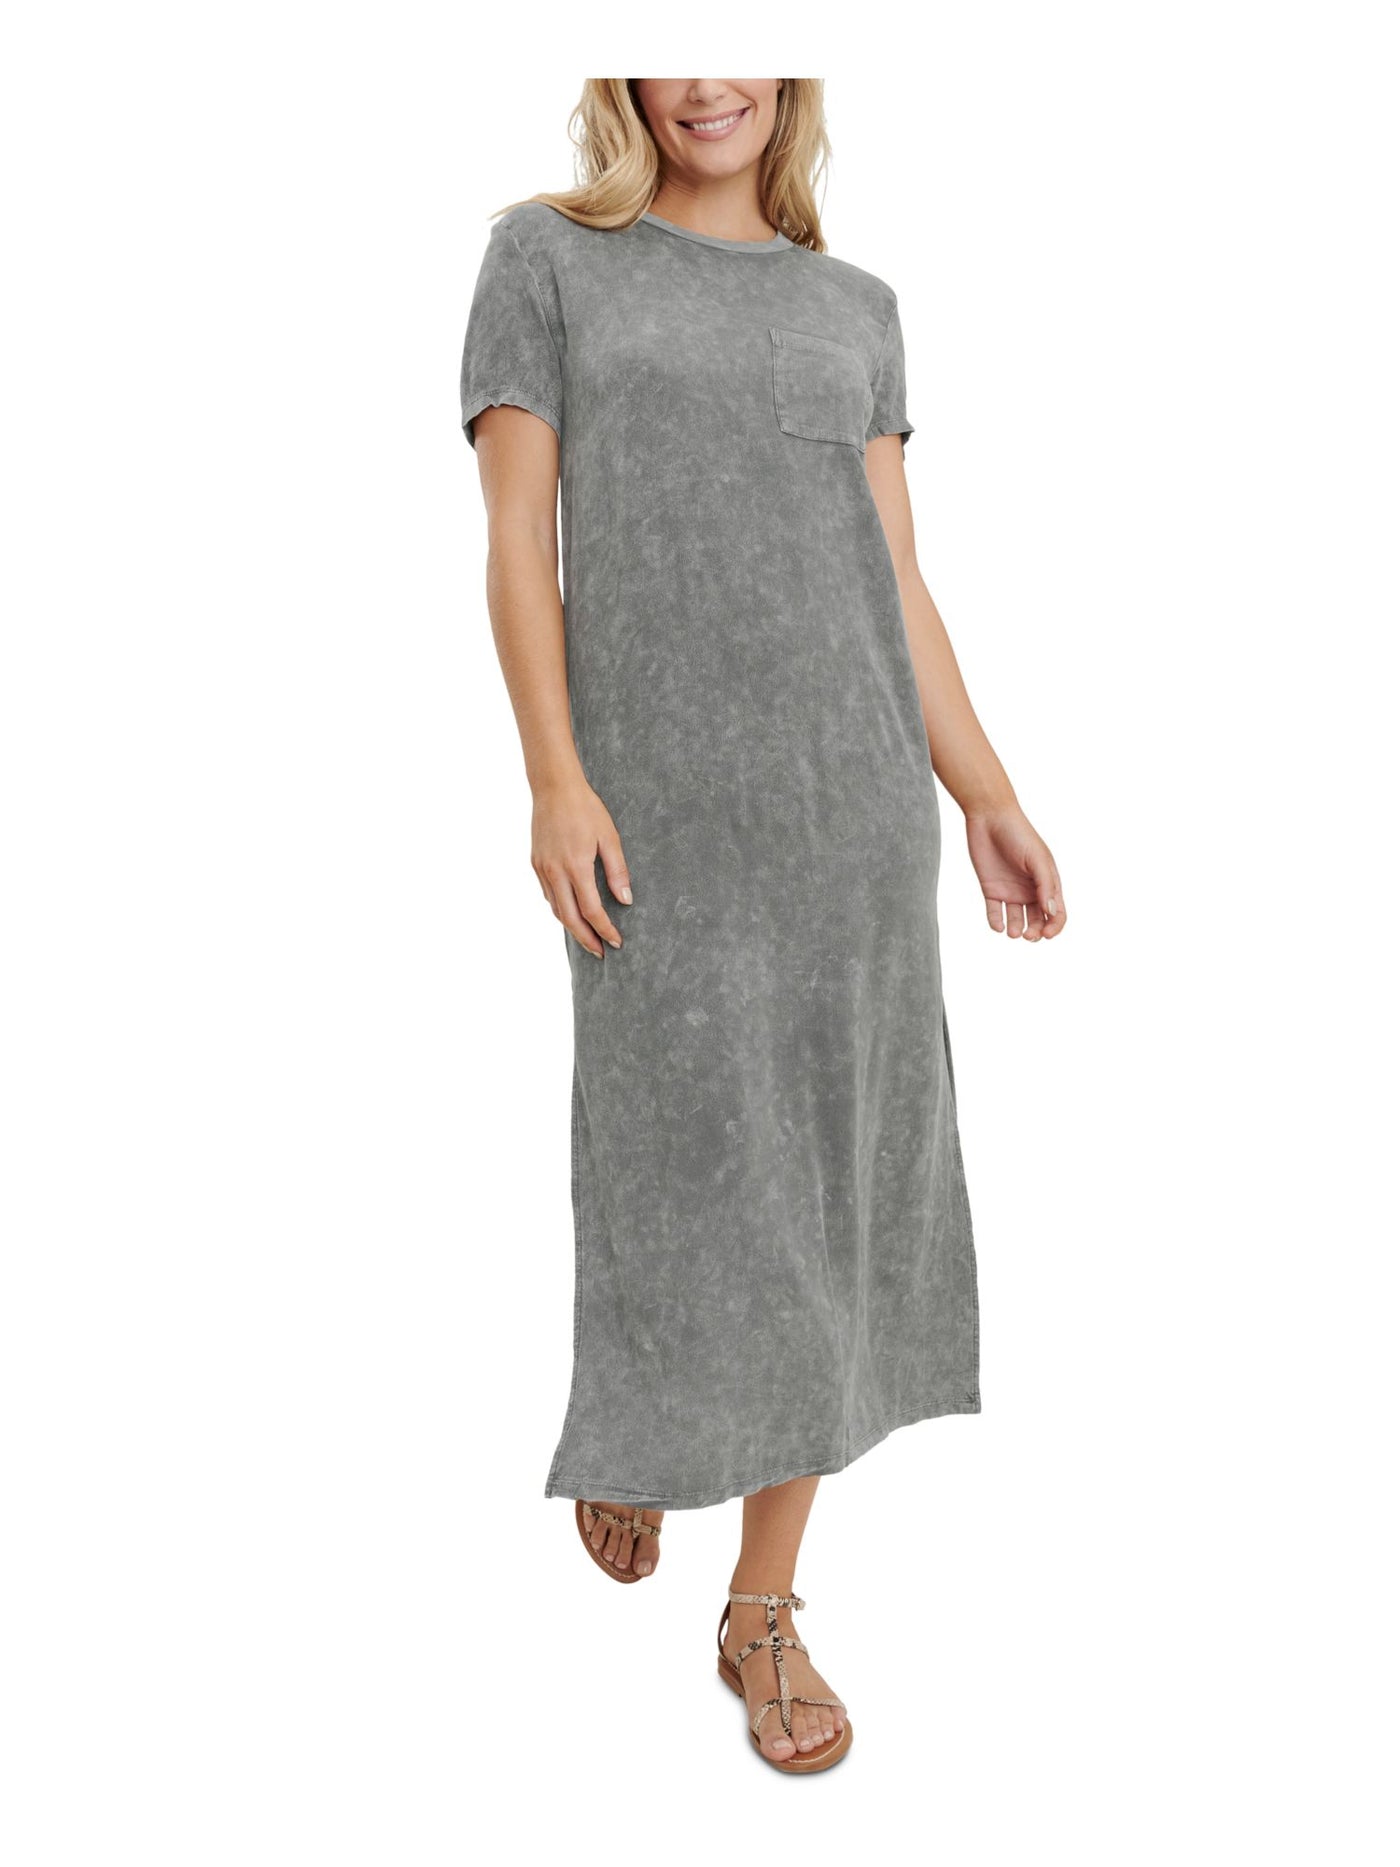 SPLENDID Womens Gray Stretch Pocketed Slitted T-shirt Unlined Short Sleeve Round Neck Midi Dress XS